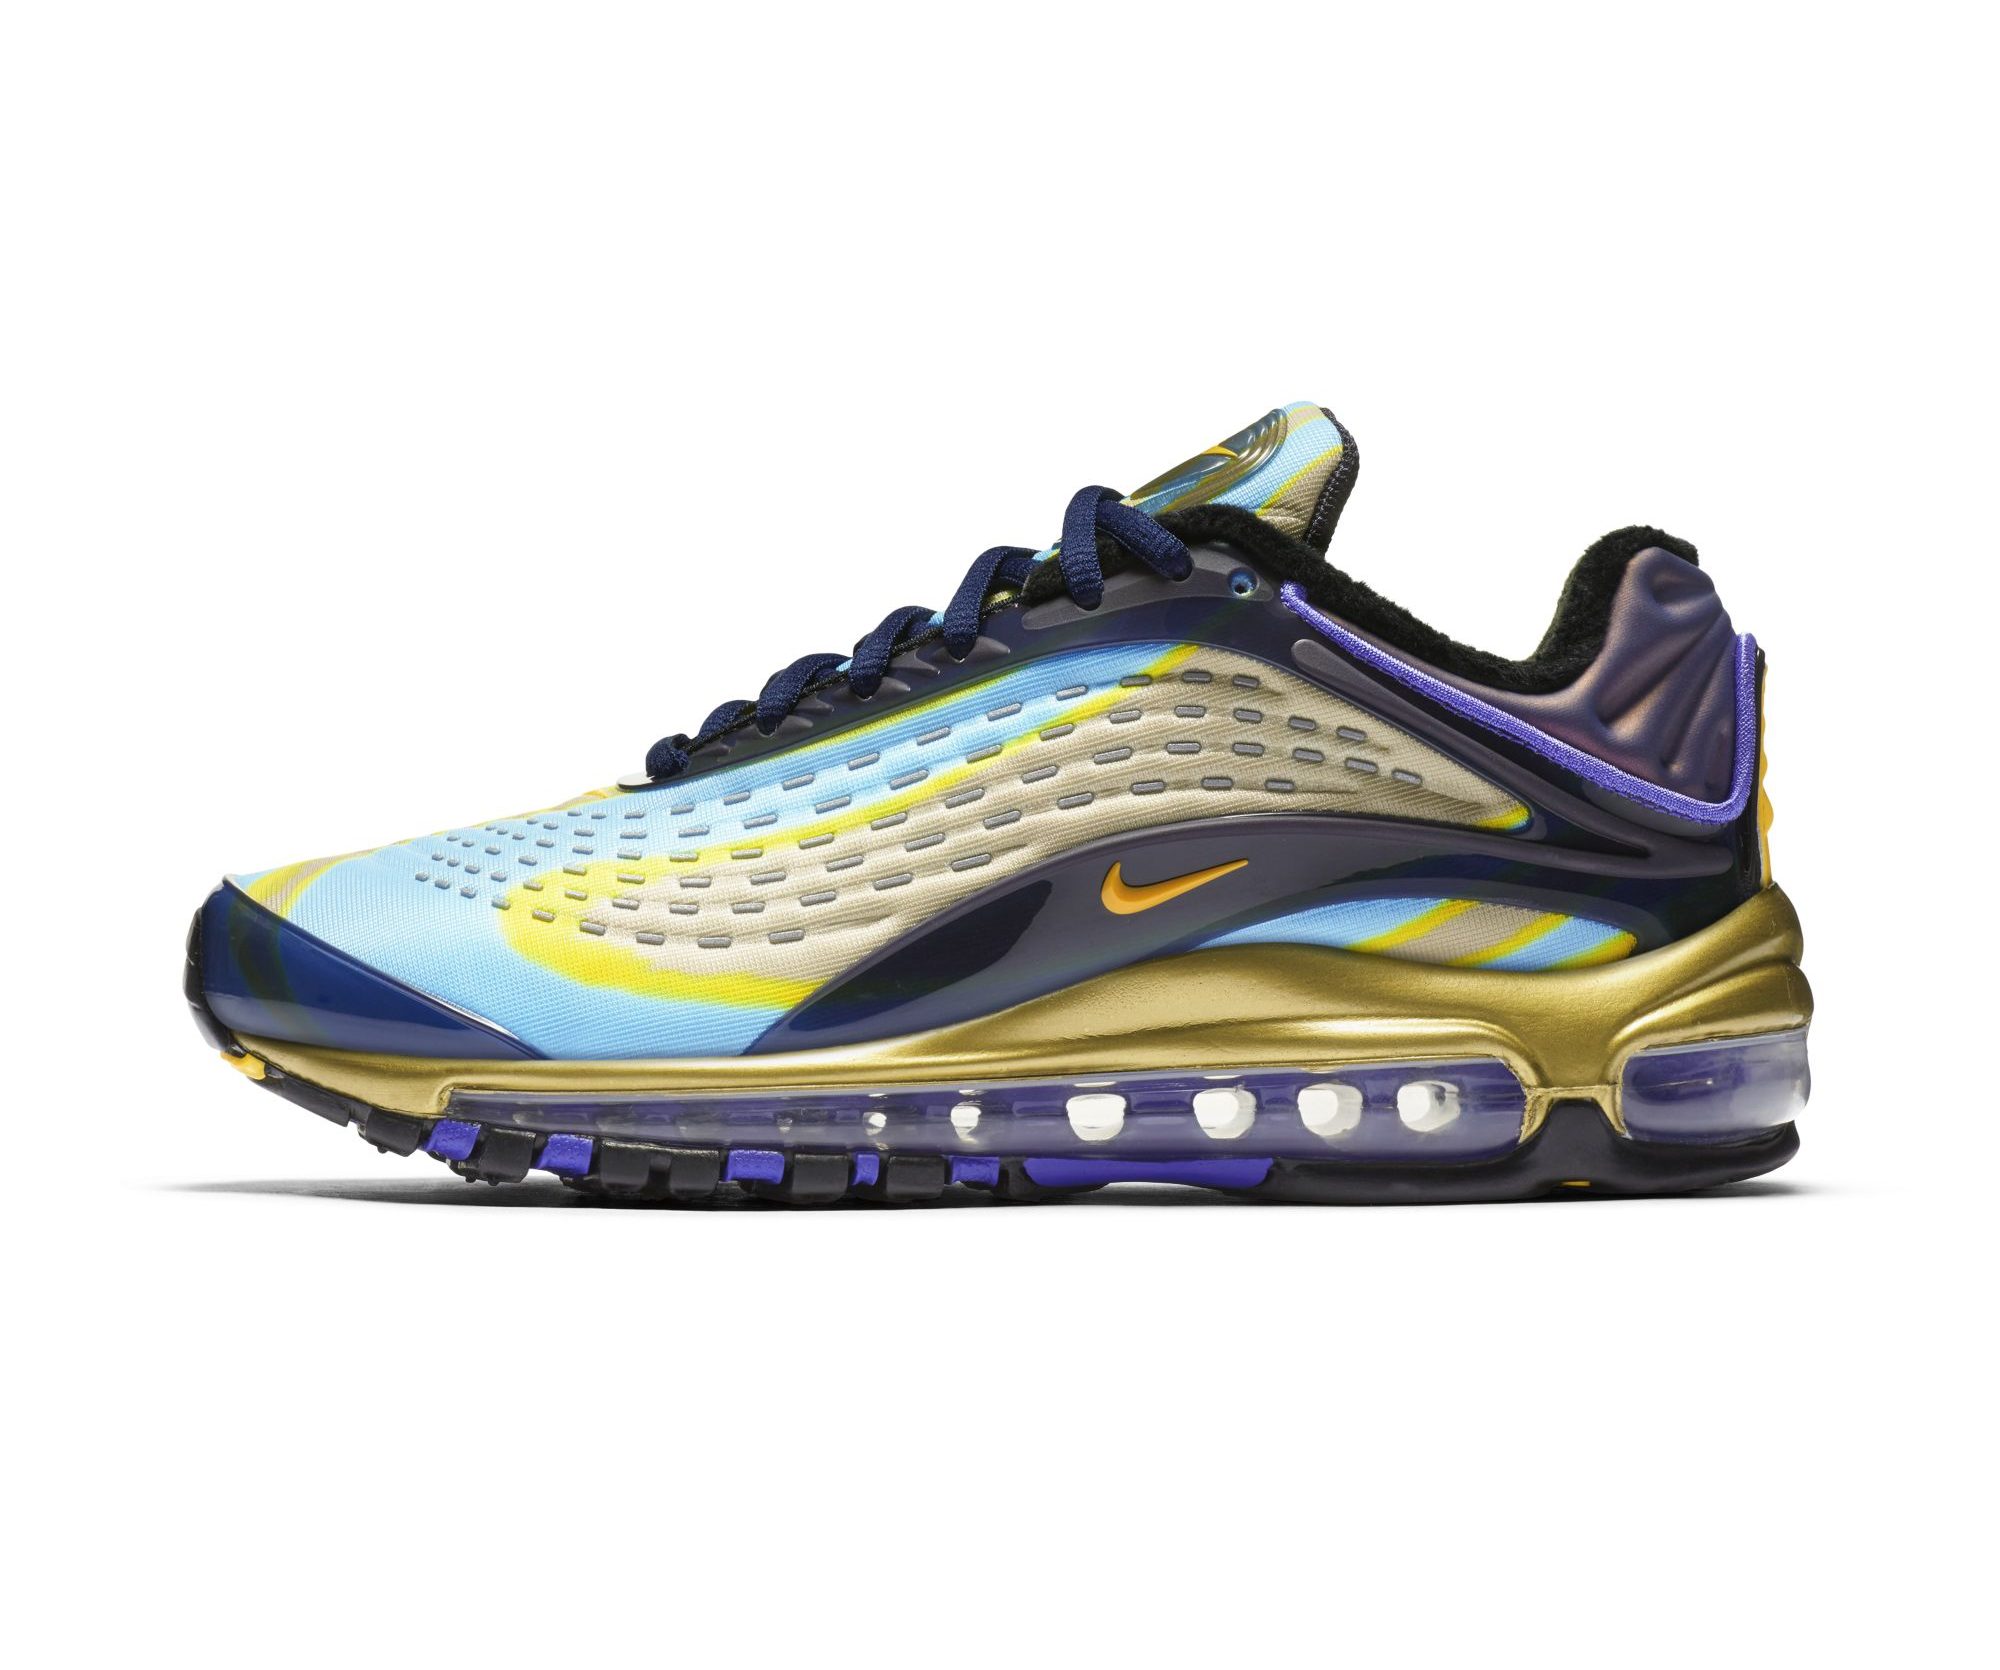 The Nike Air Max Deluxe is Back, and It Will Be Available in ... خيزران الحظ